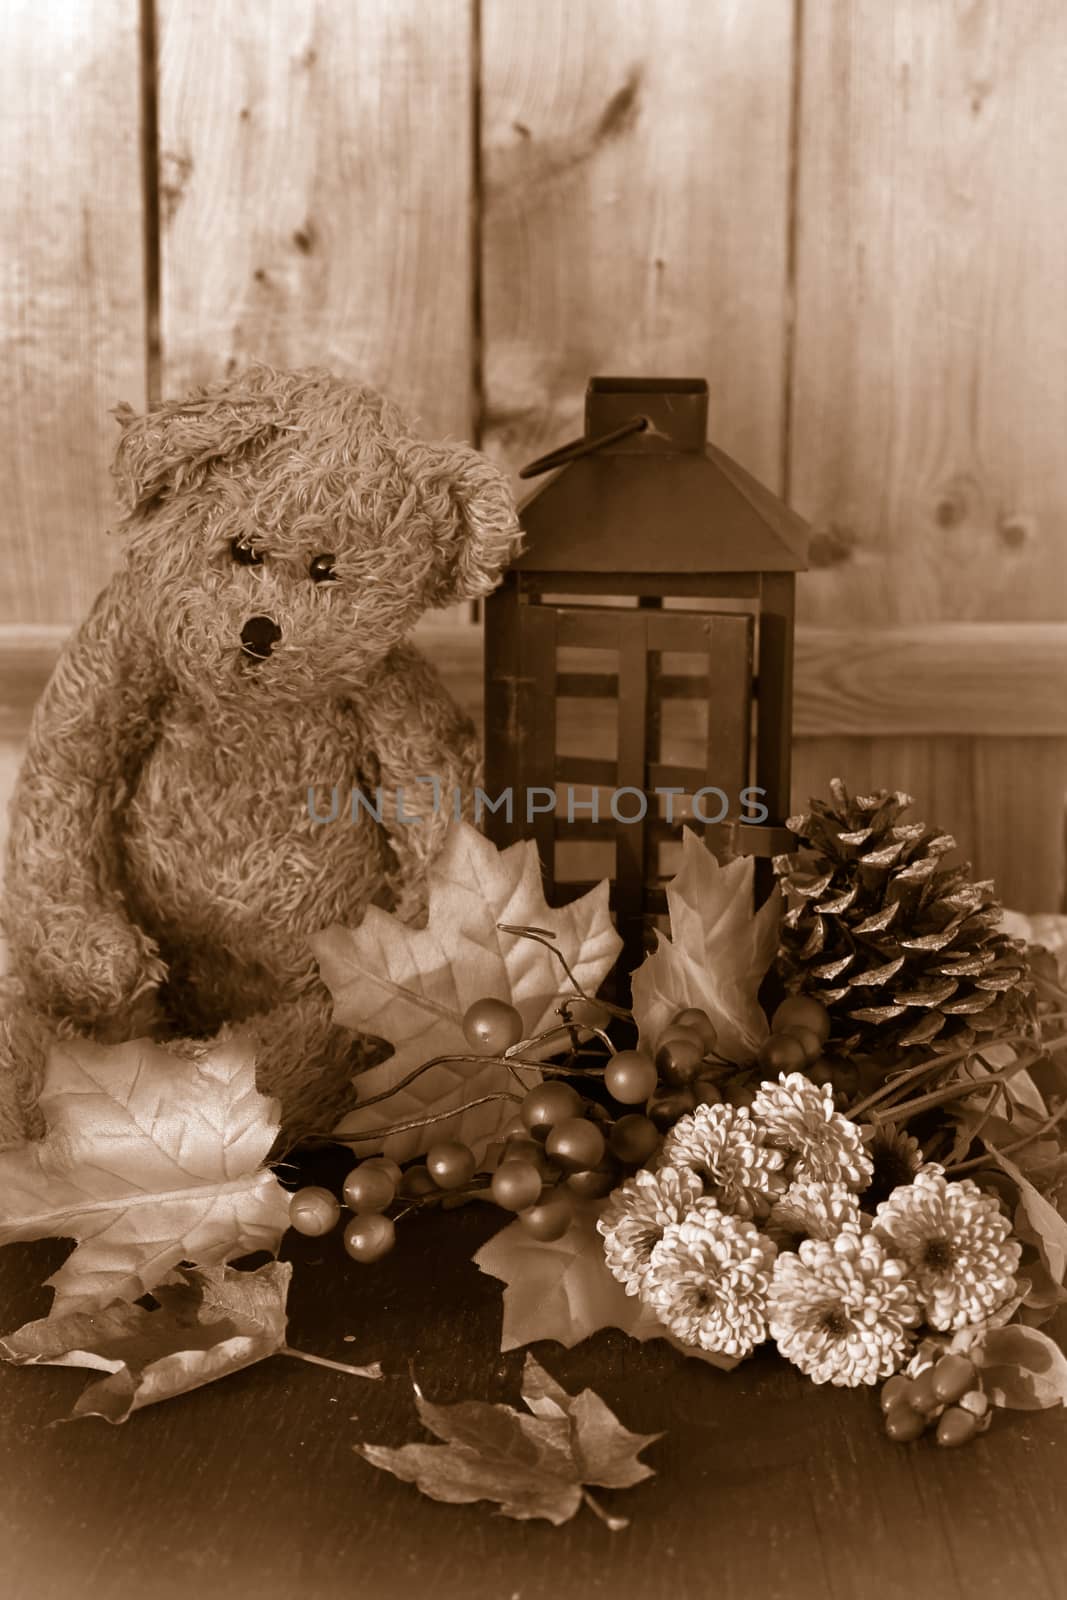 Fall flowers and teddy bear by gvictoria